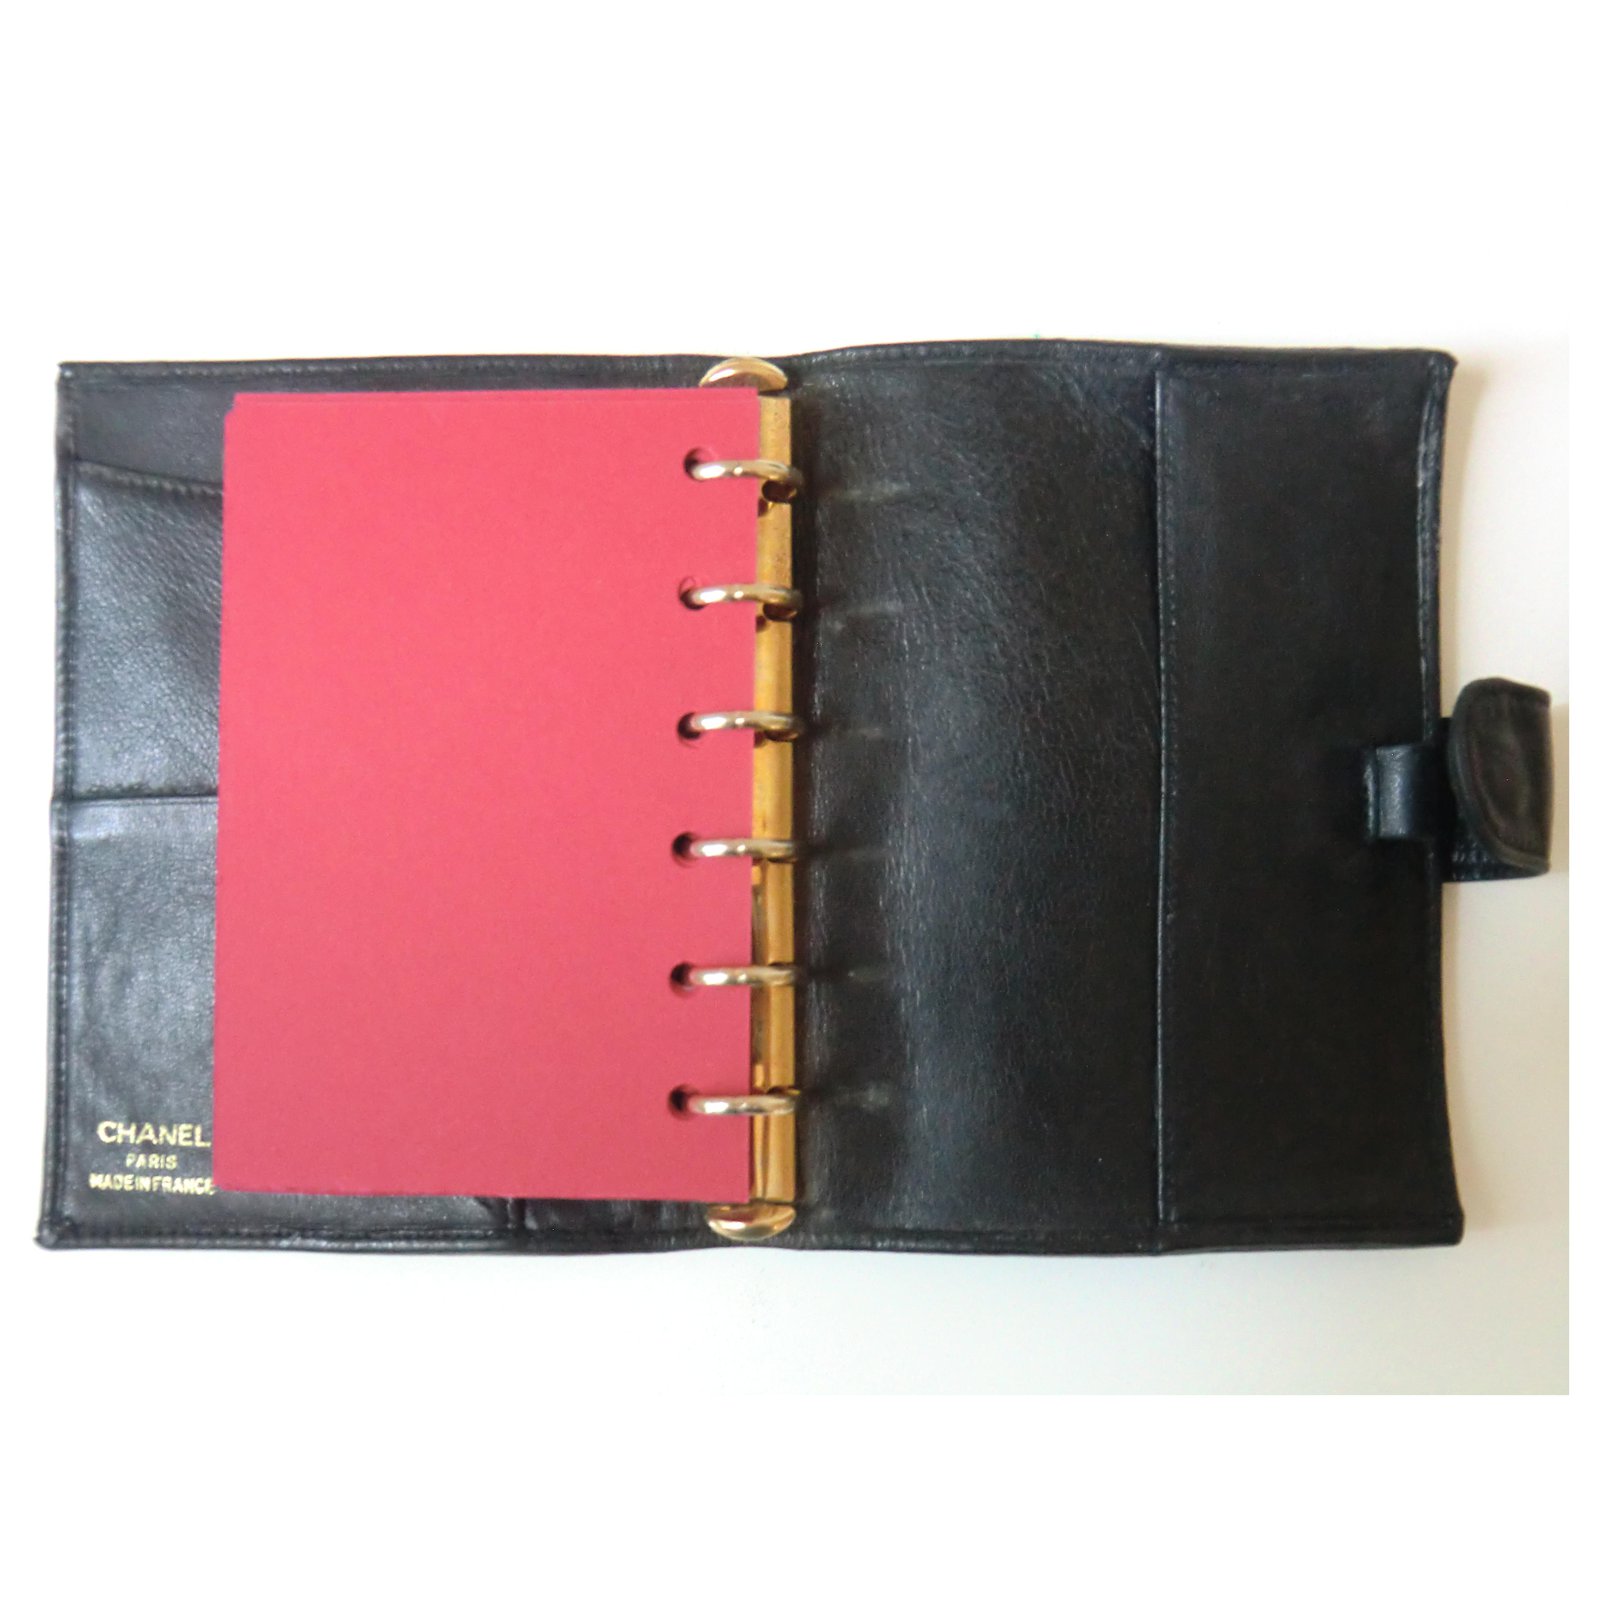 Chanel Timeless Leather Large Planner Agenda Cover